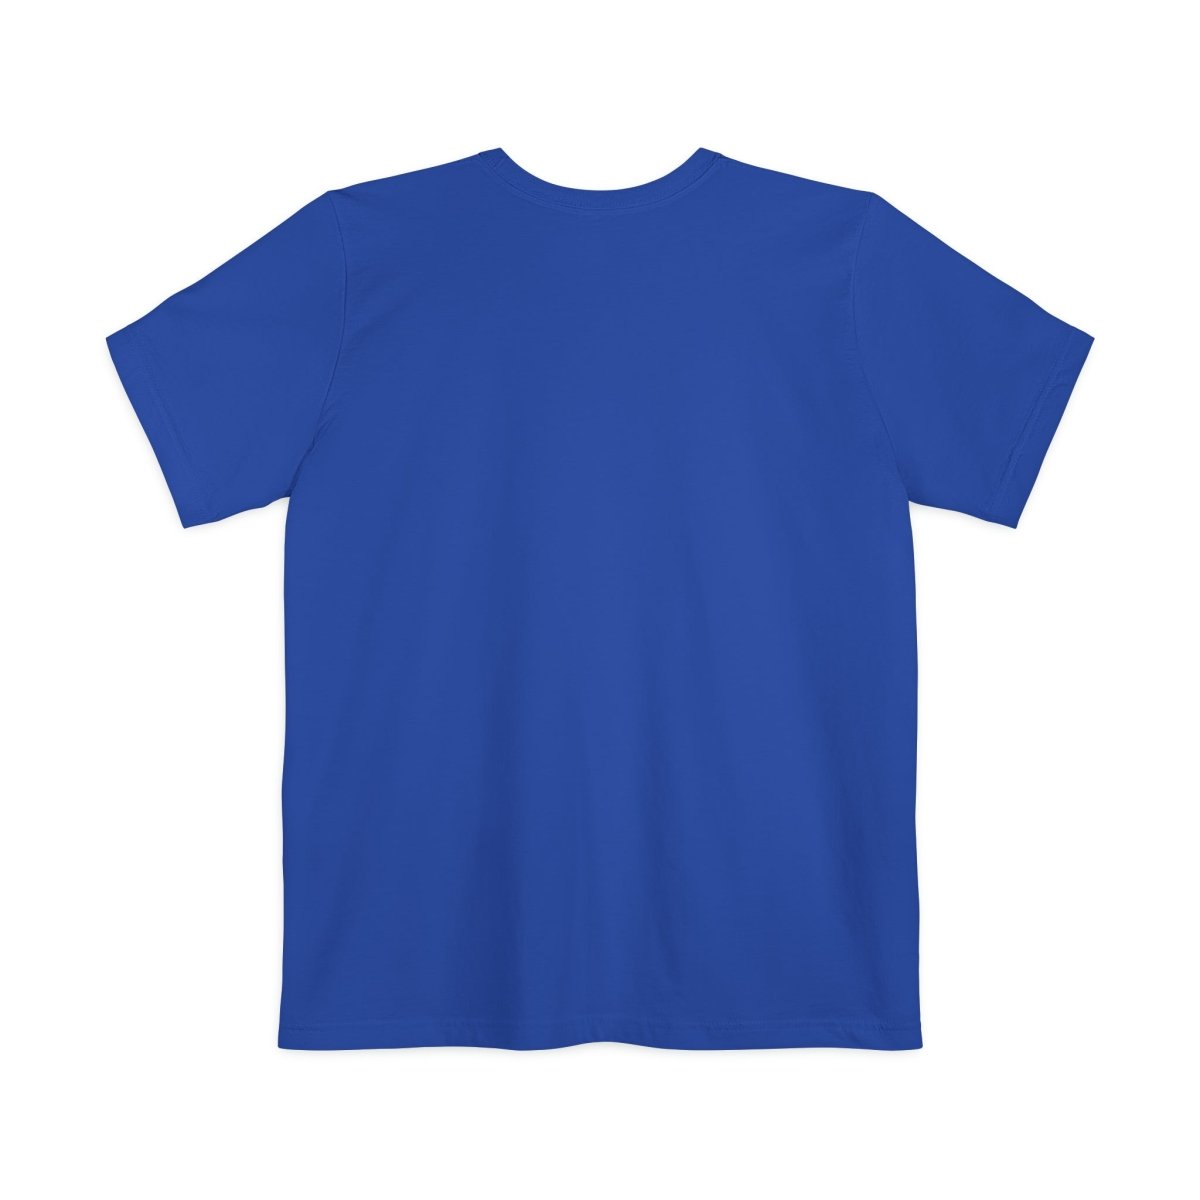 Royal Cat Pocket T-shirt - Style A - DarzyStore